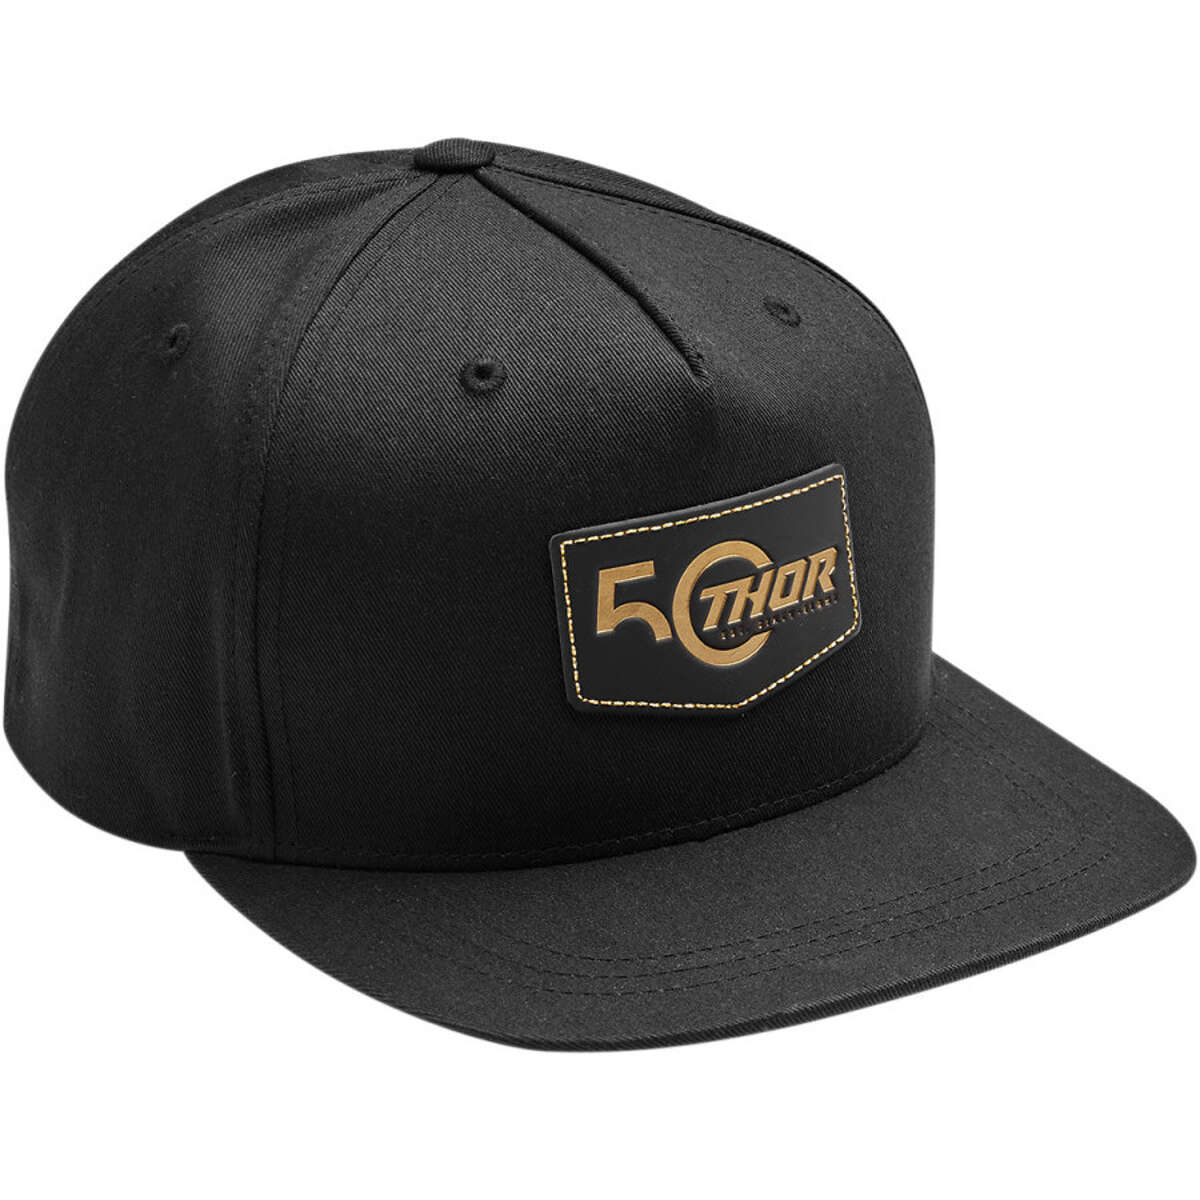 Thor Casquette Snap Back 50th Anniversary s8 - Black/Gold